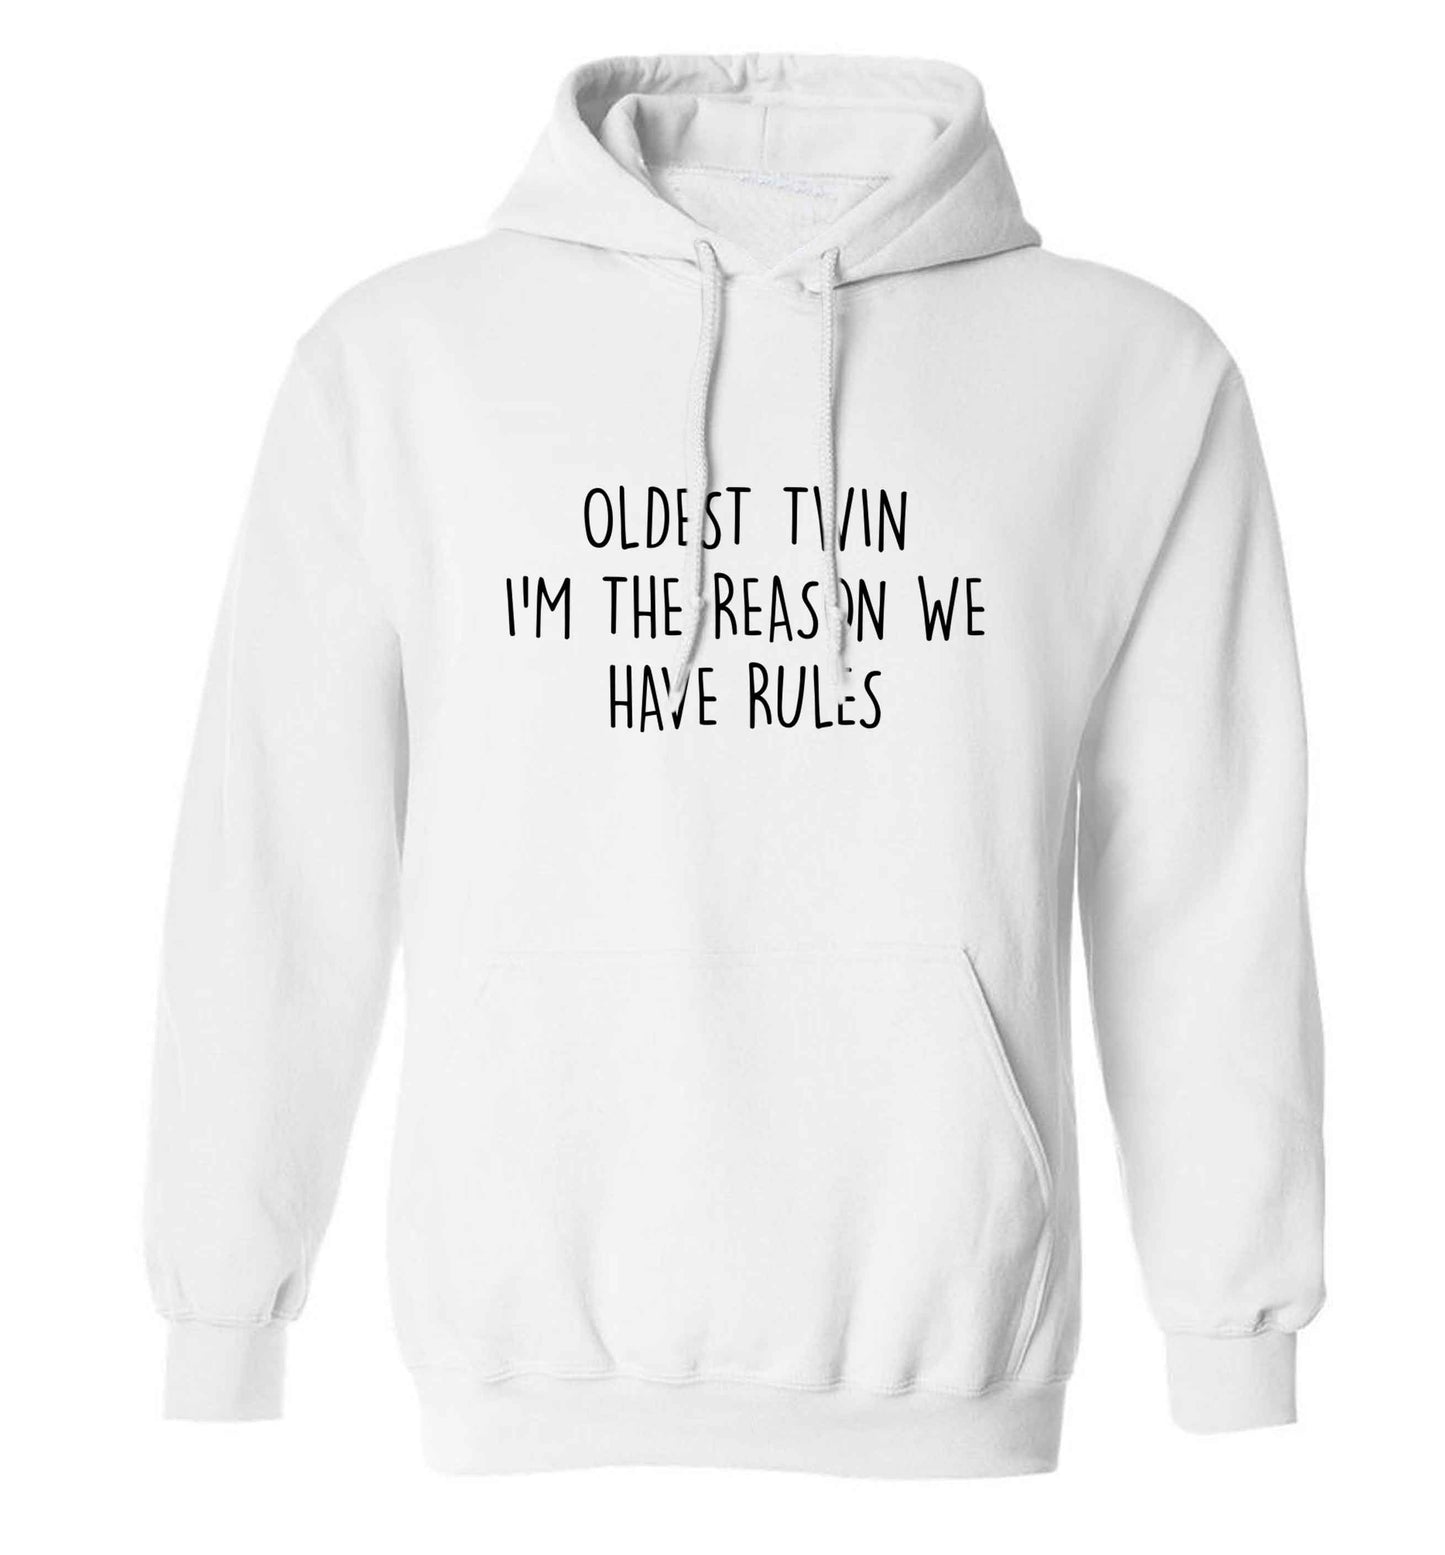 Oldest twin I'm the reason we have rules adults unisex white hoodie 2XL